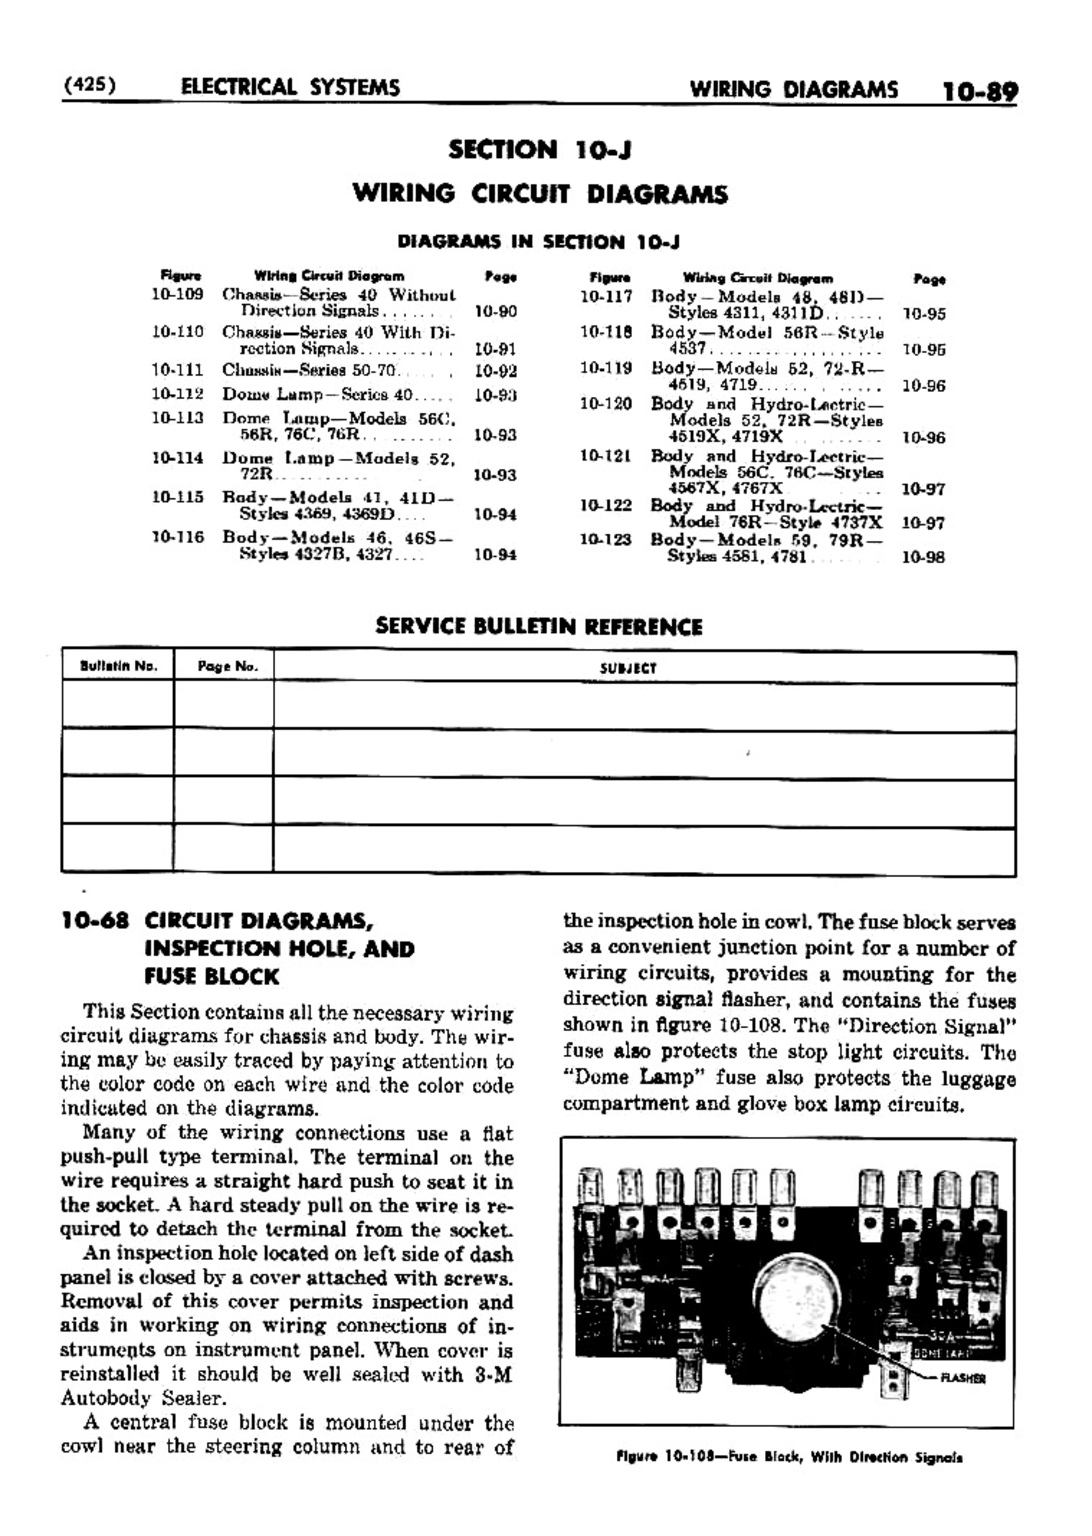 n_11 1952 Buick Shop Manual - Electrical Systems-089-089.jpg